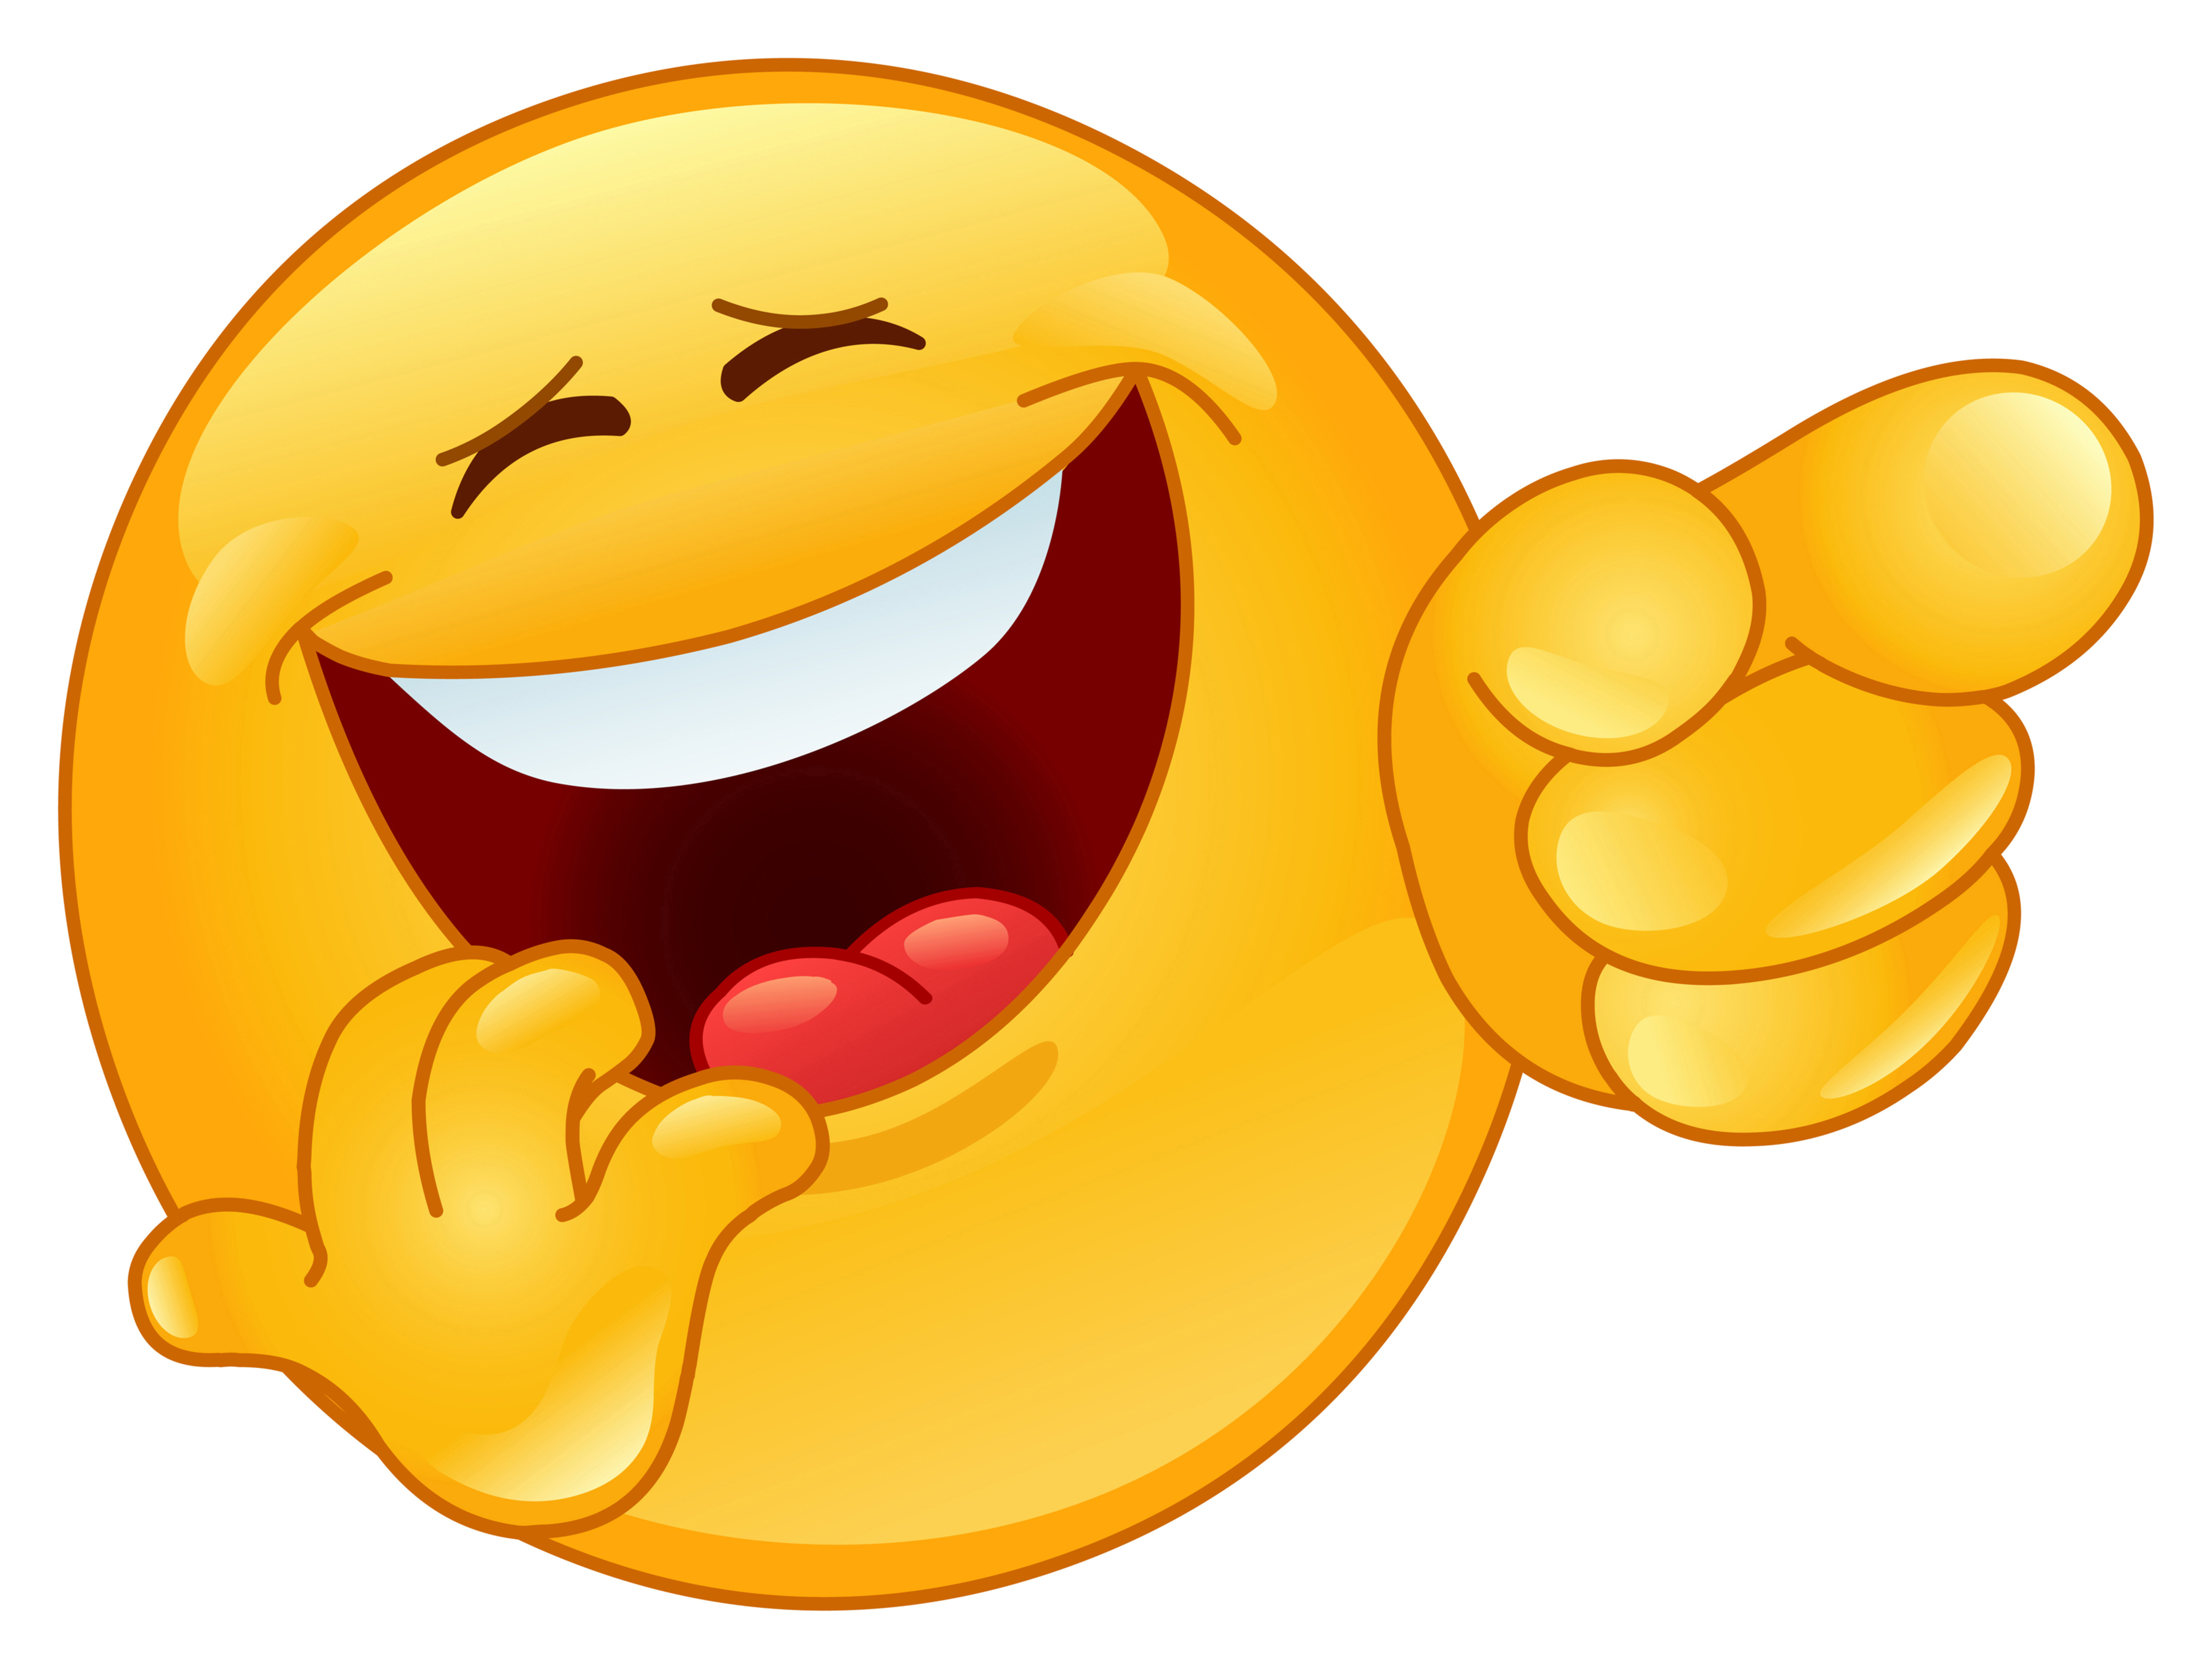 11 Really Funny Emoticons Images - Funny Smiley Faces, Funny Animated